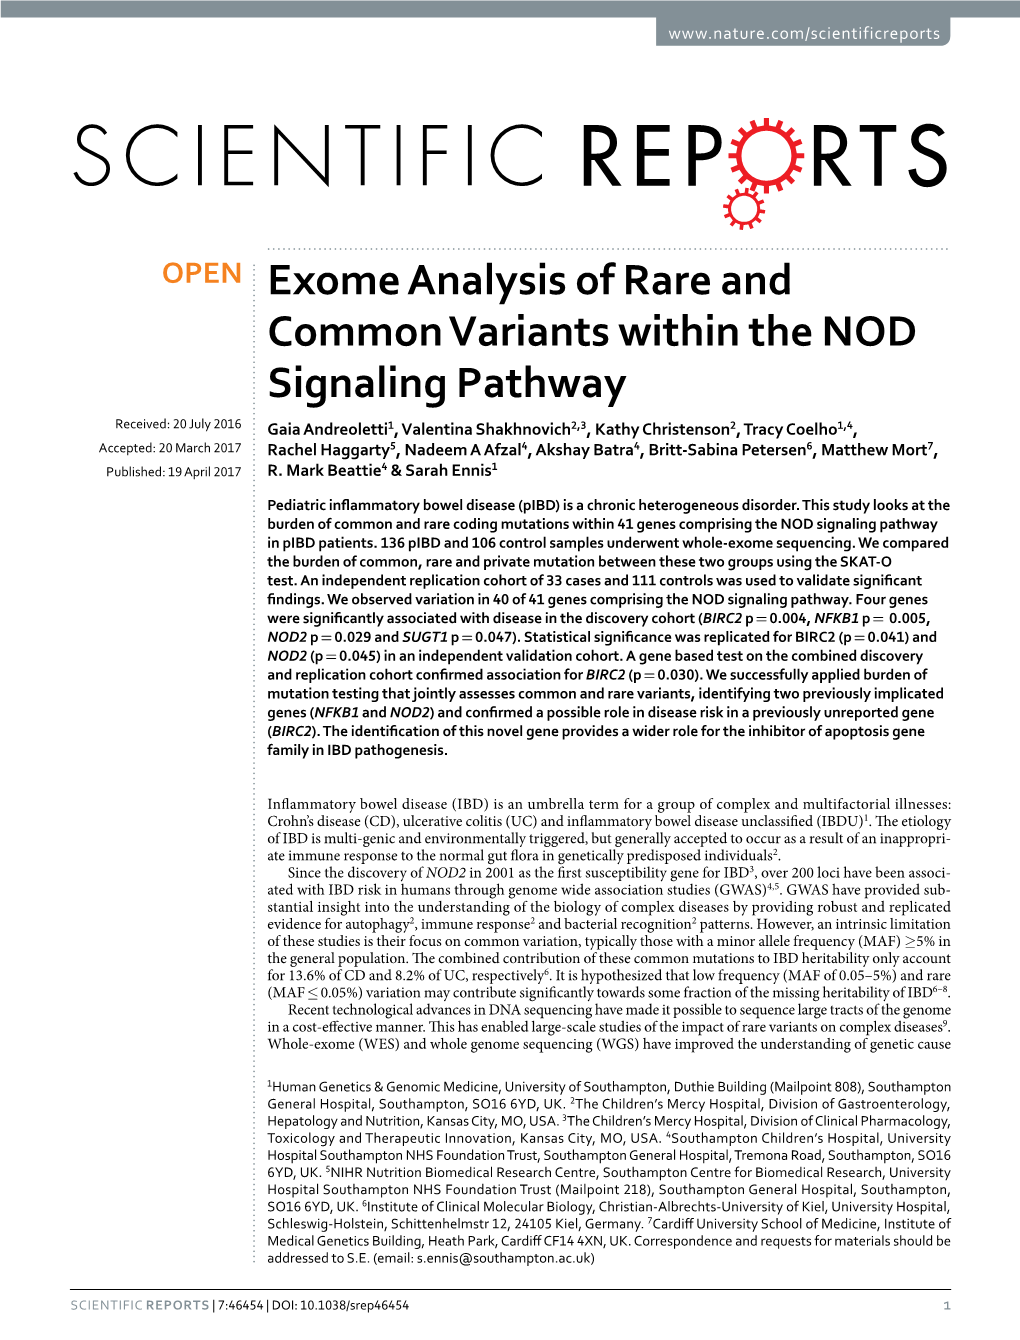 Exome Analysis of Rare and Common Variants Within the NOD Signaling